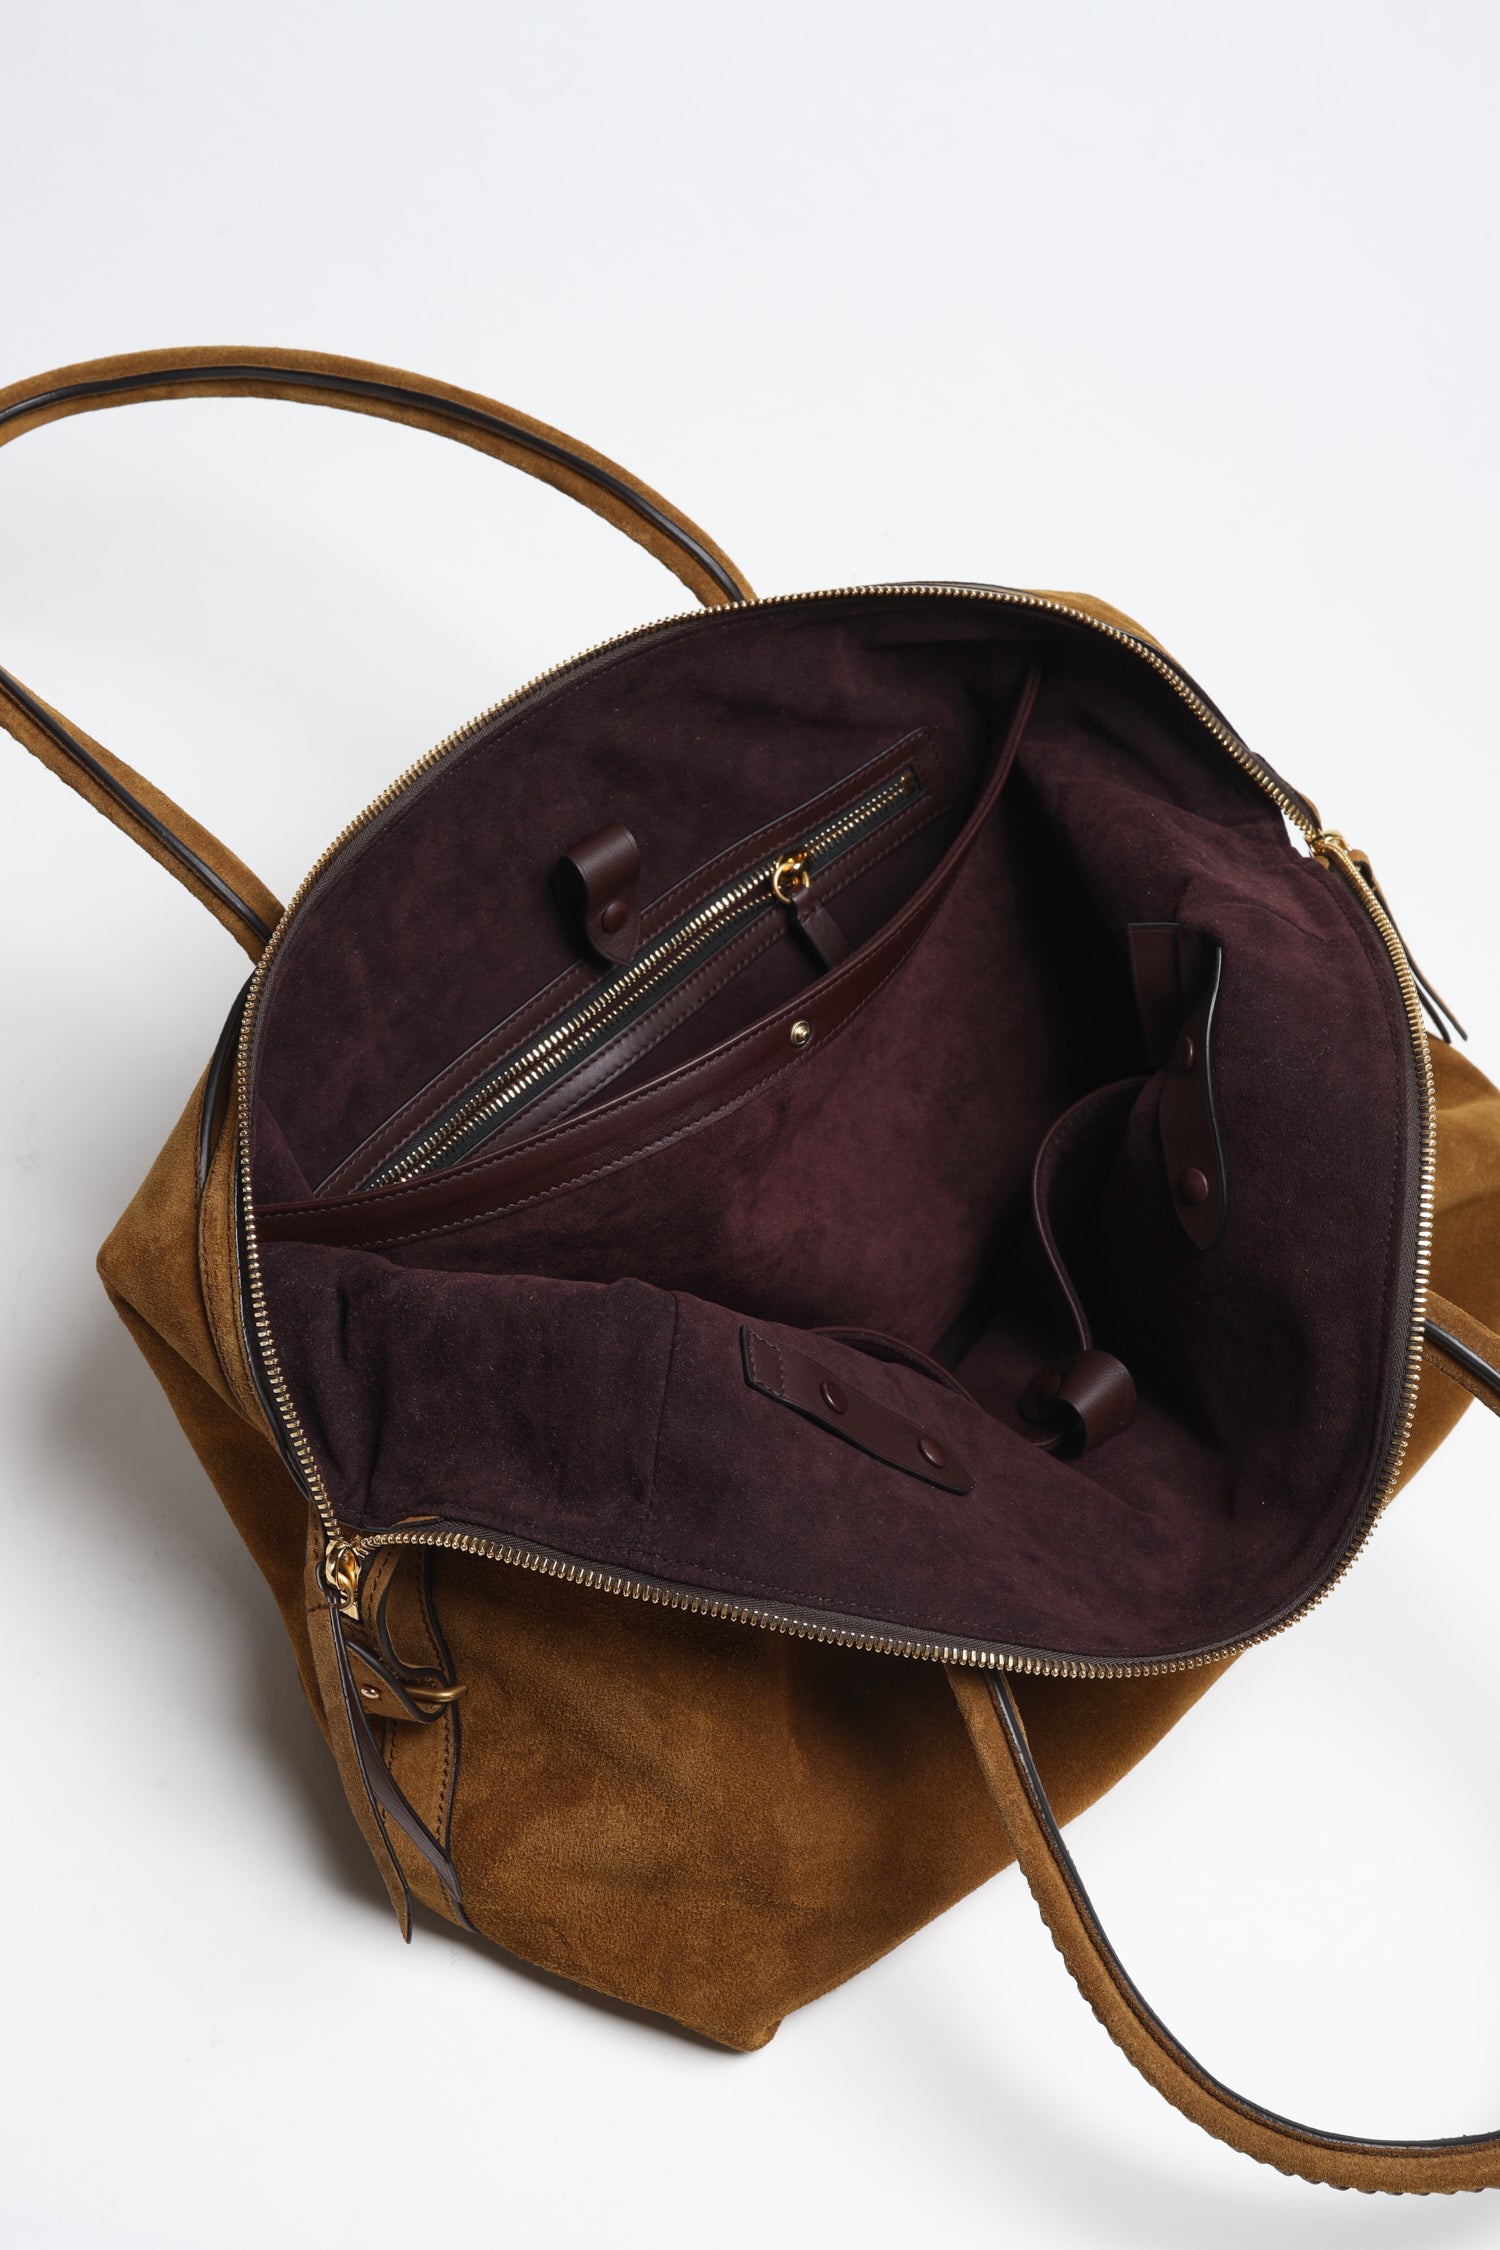 Tasche Perriand All Day in Suede MarrakechMétier - Anita Hass